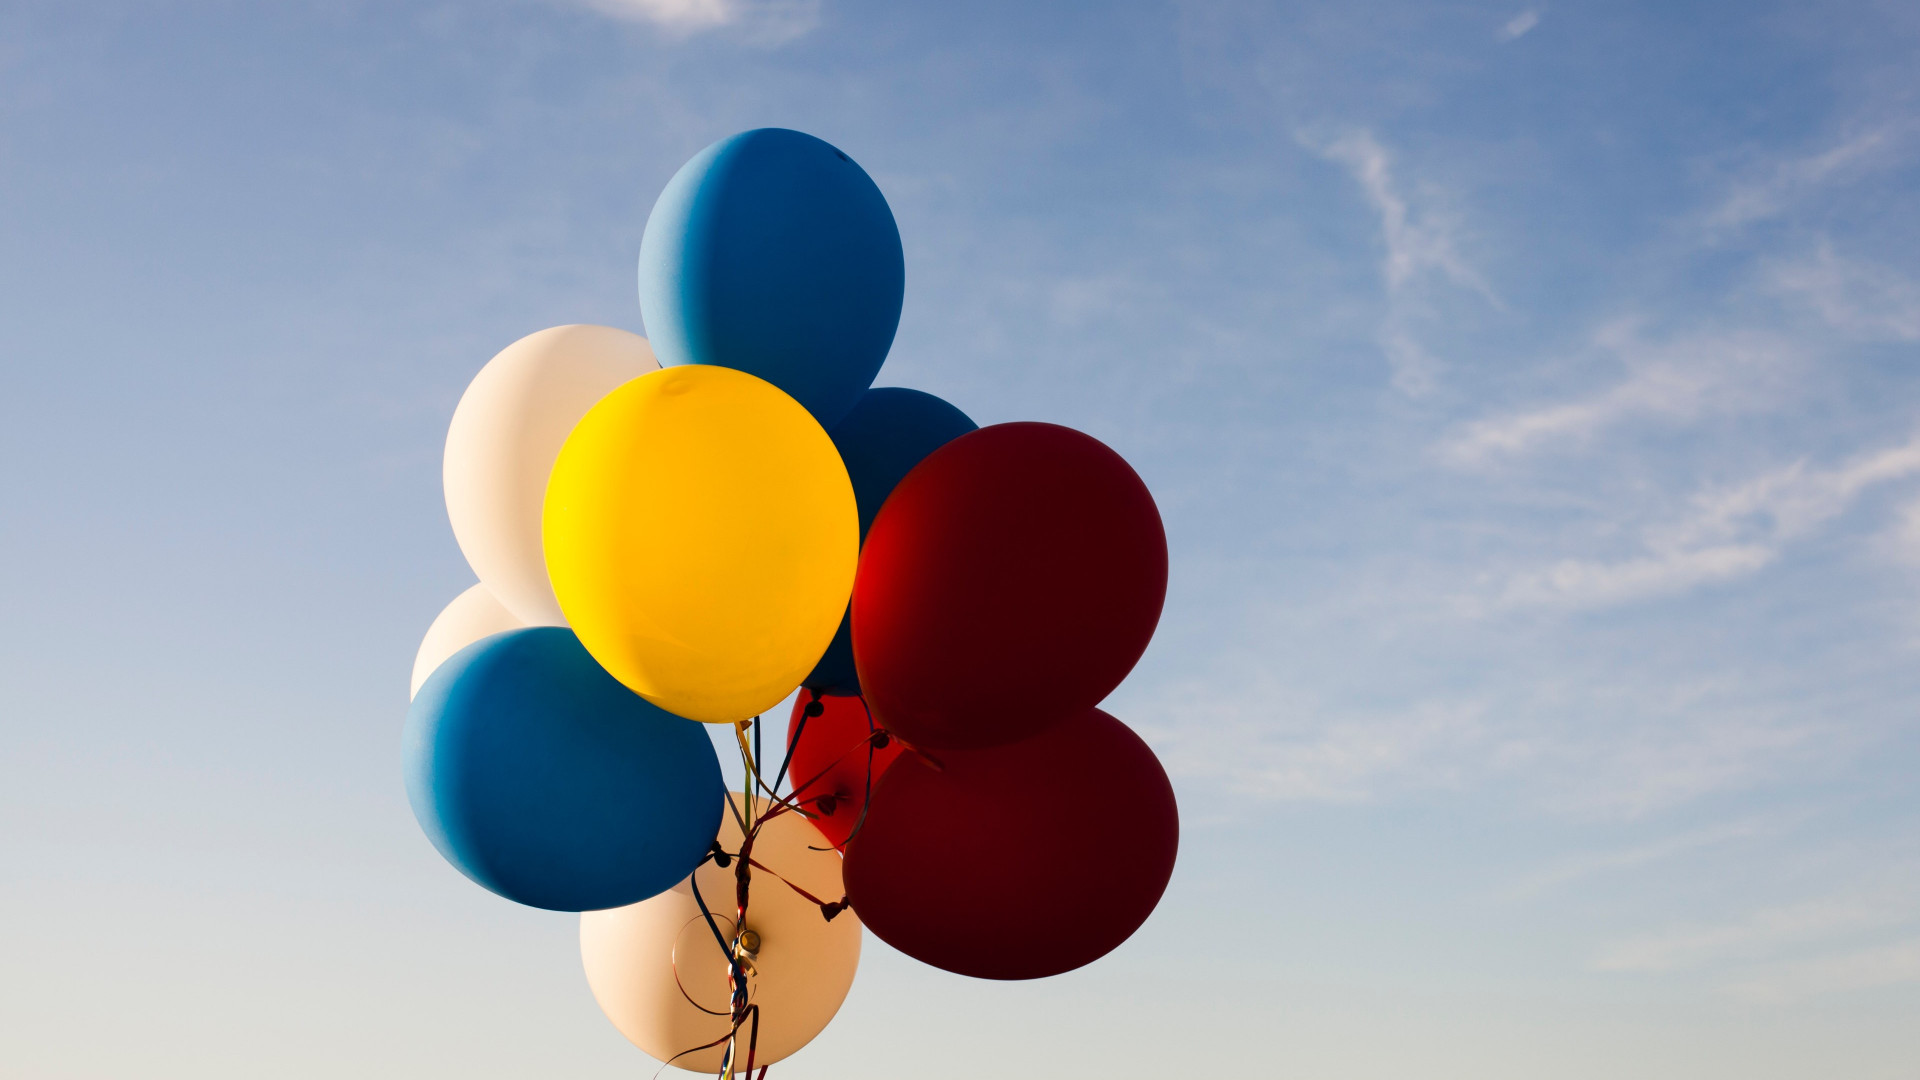 Colored balloons wallpaper 1920x1080